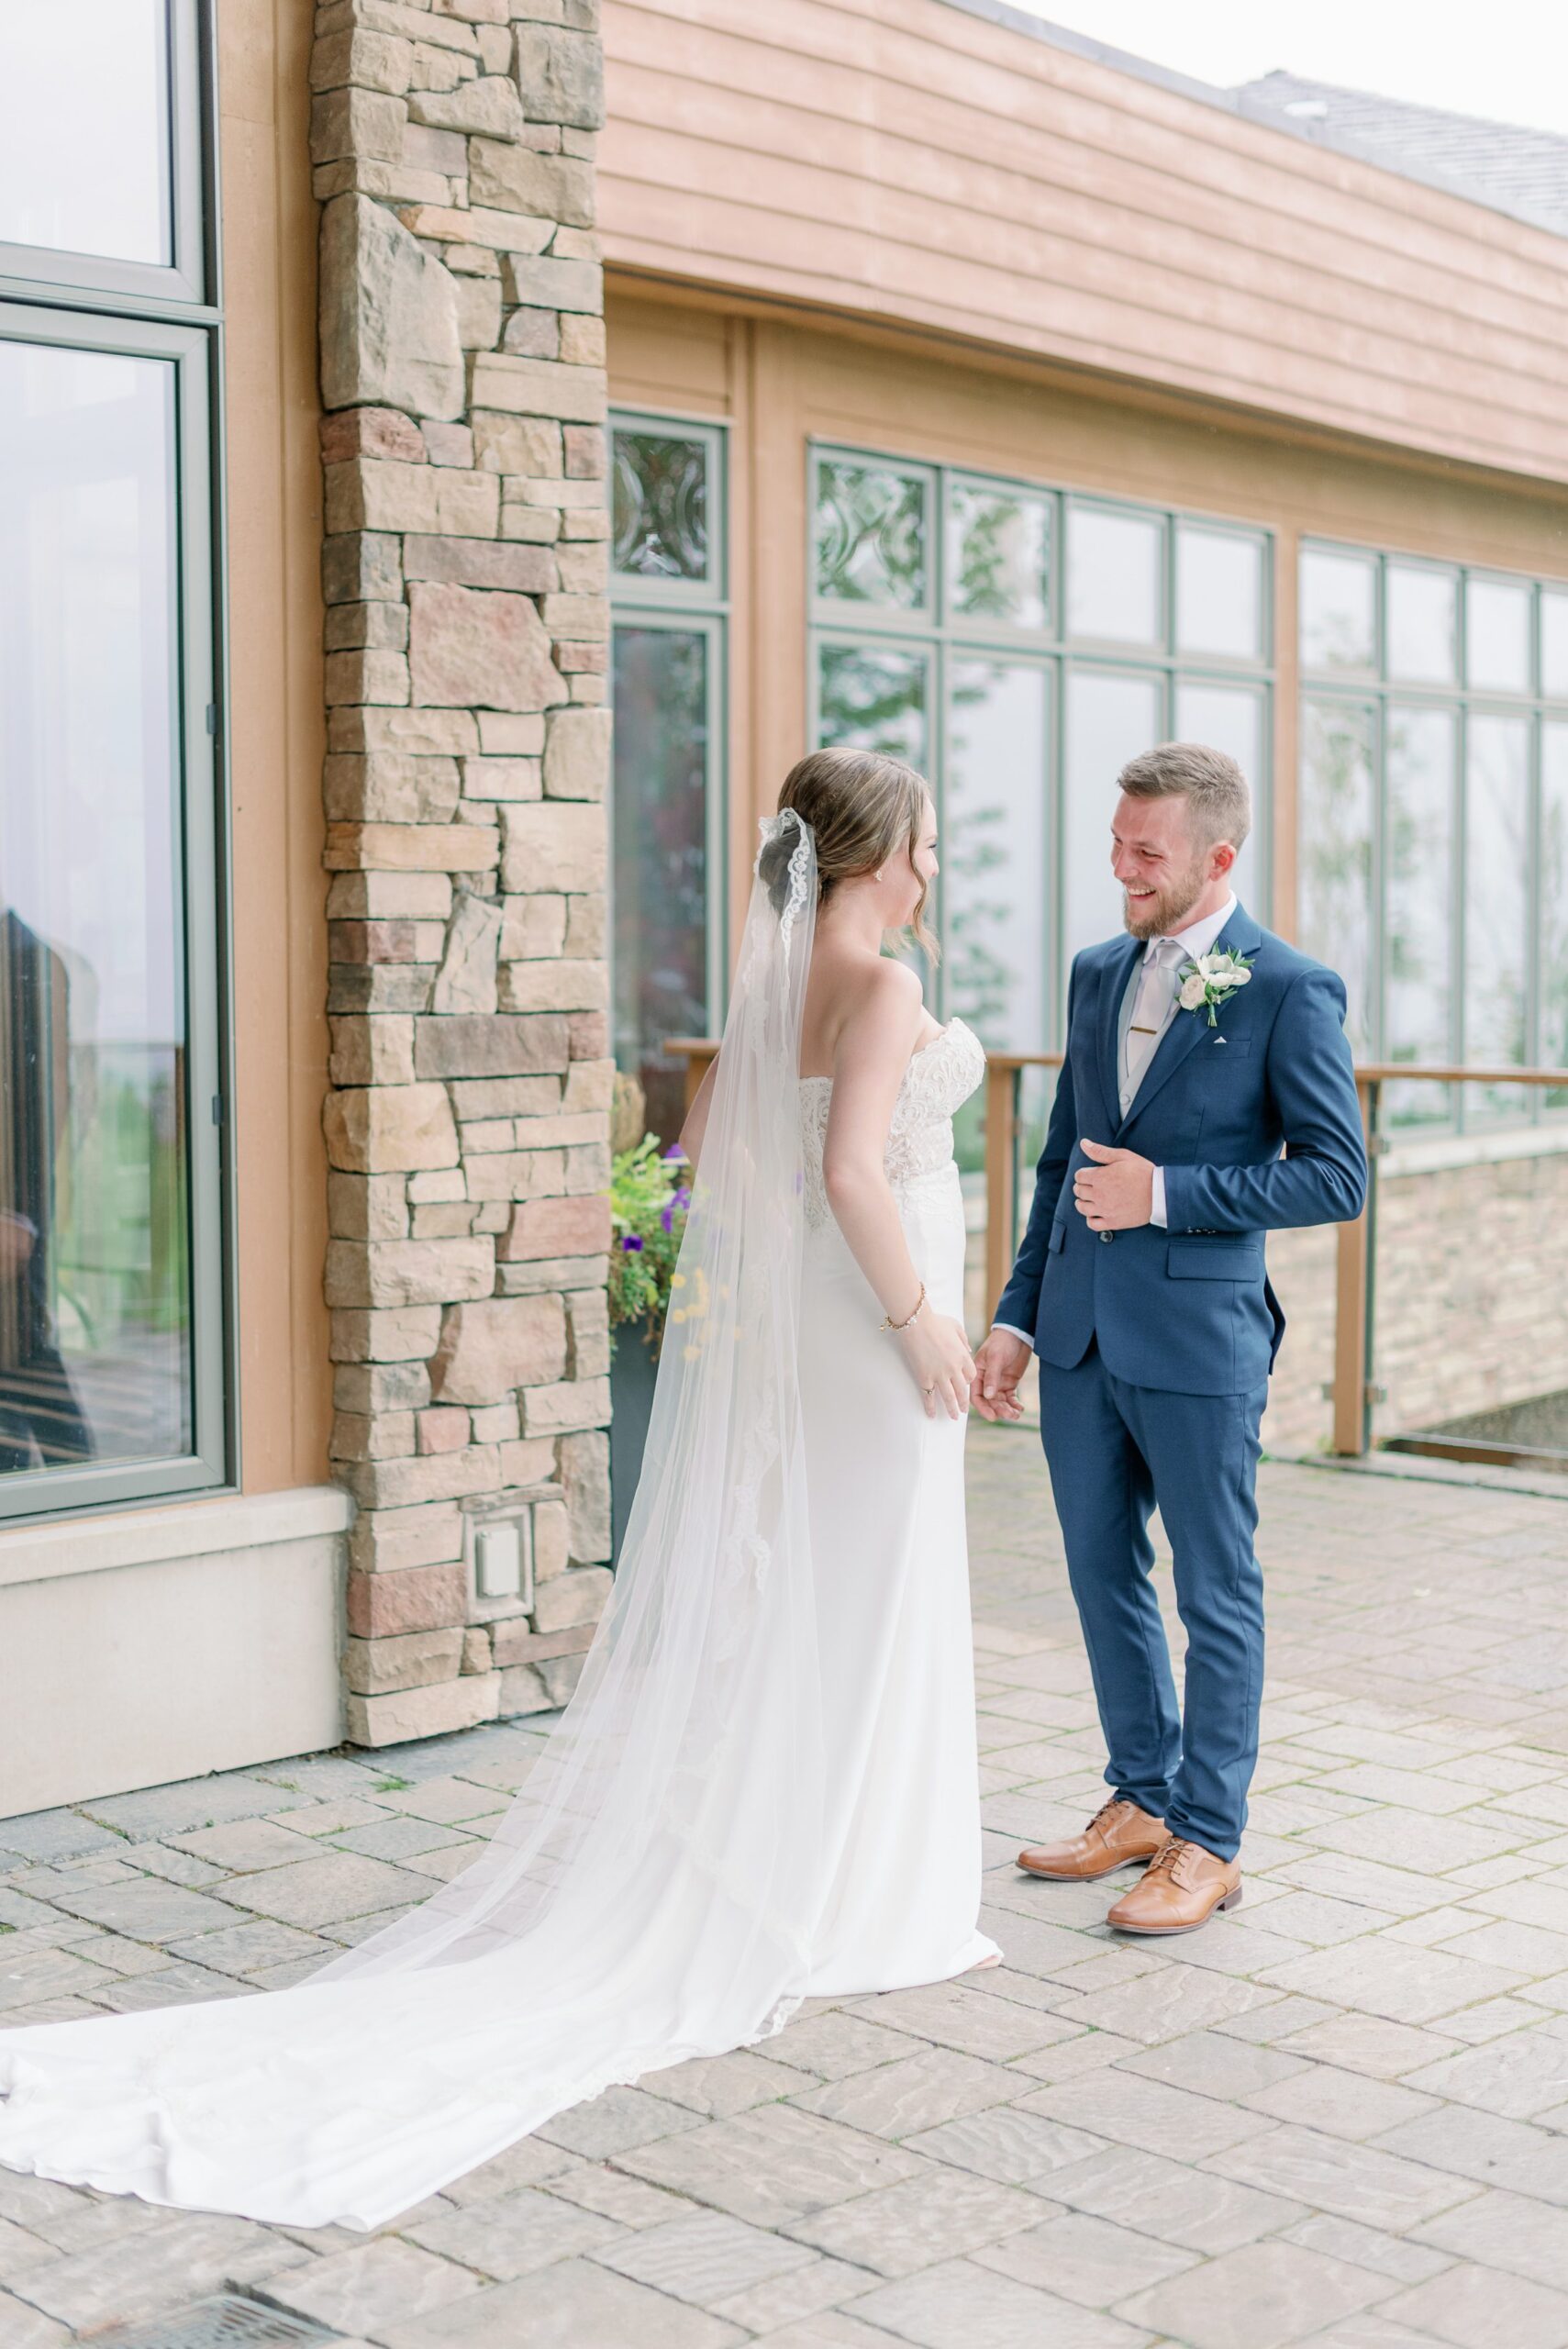 Emotional first look at Barrie wedding. Photographed by Maranda Elysse Photography.